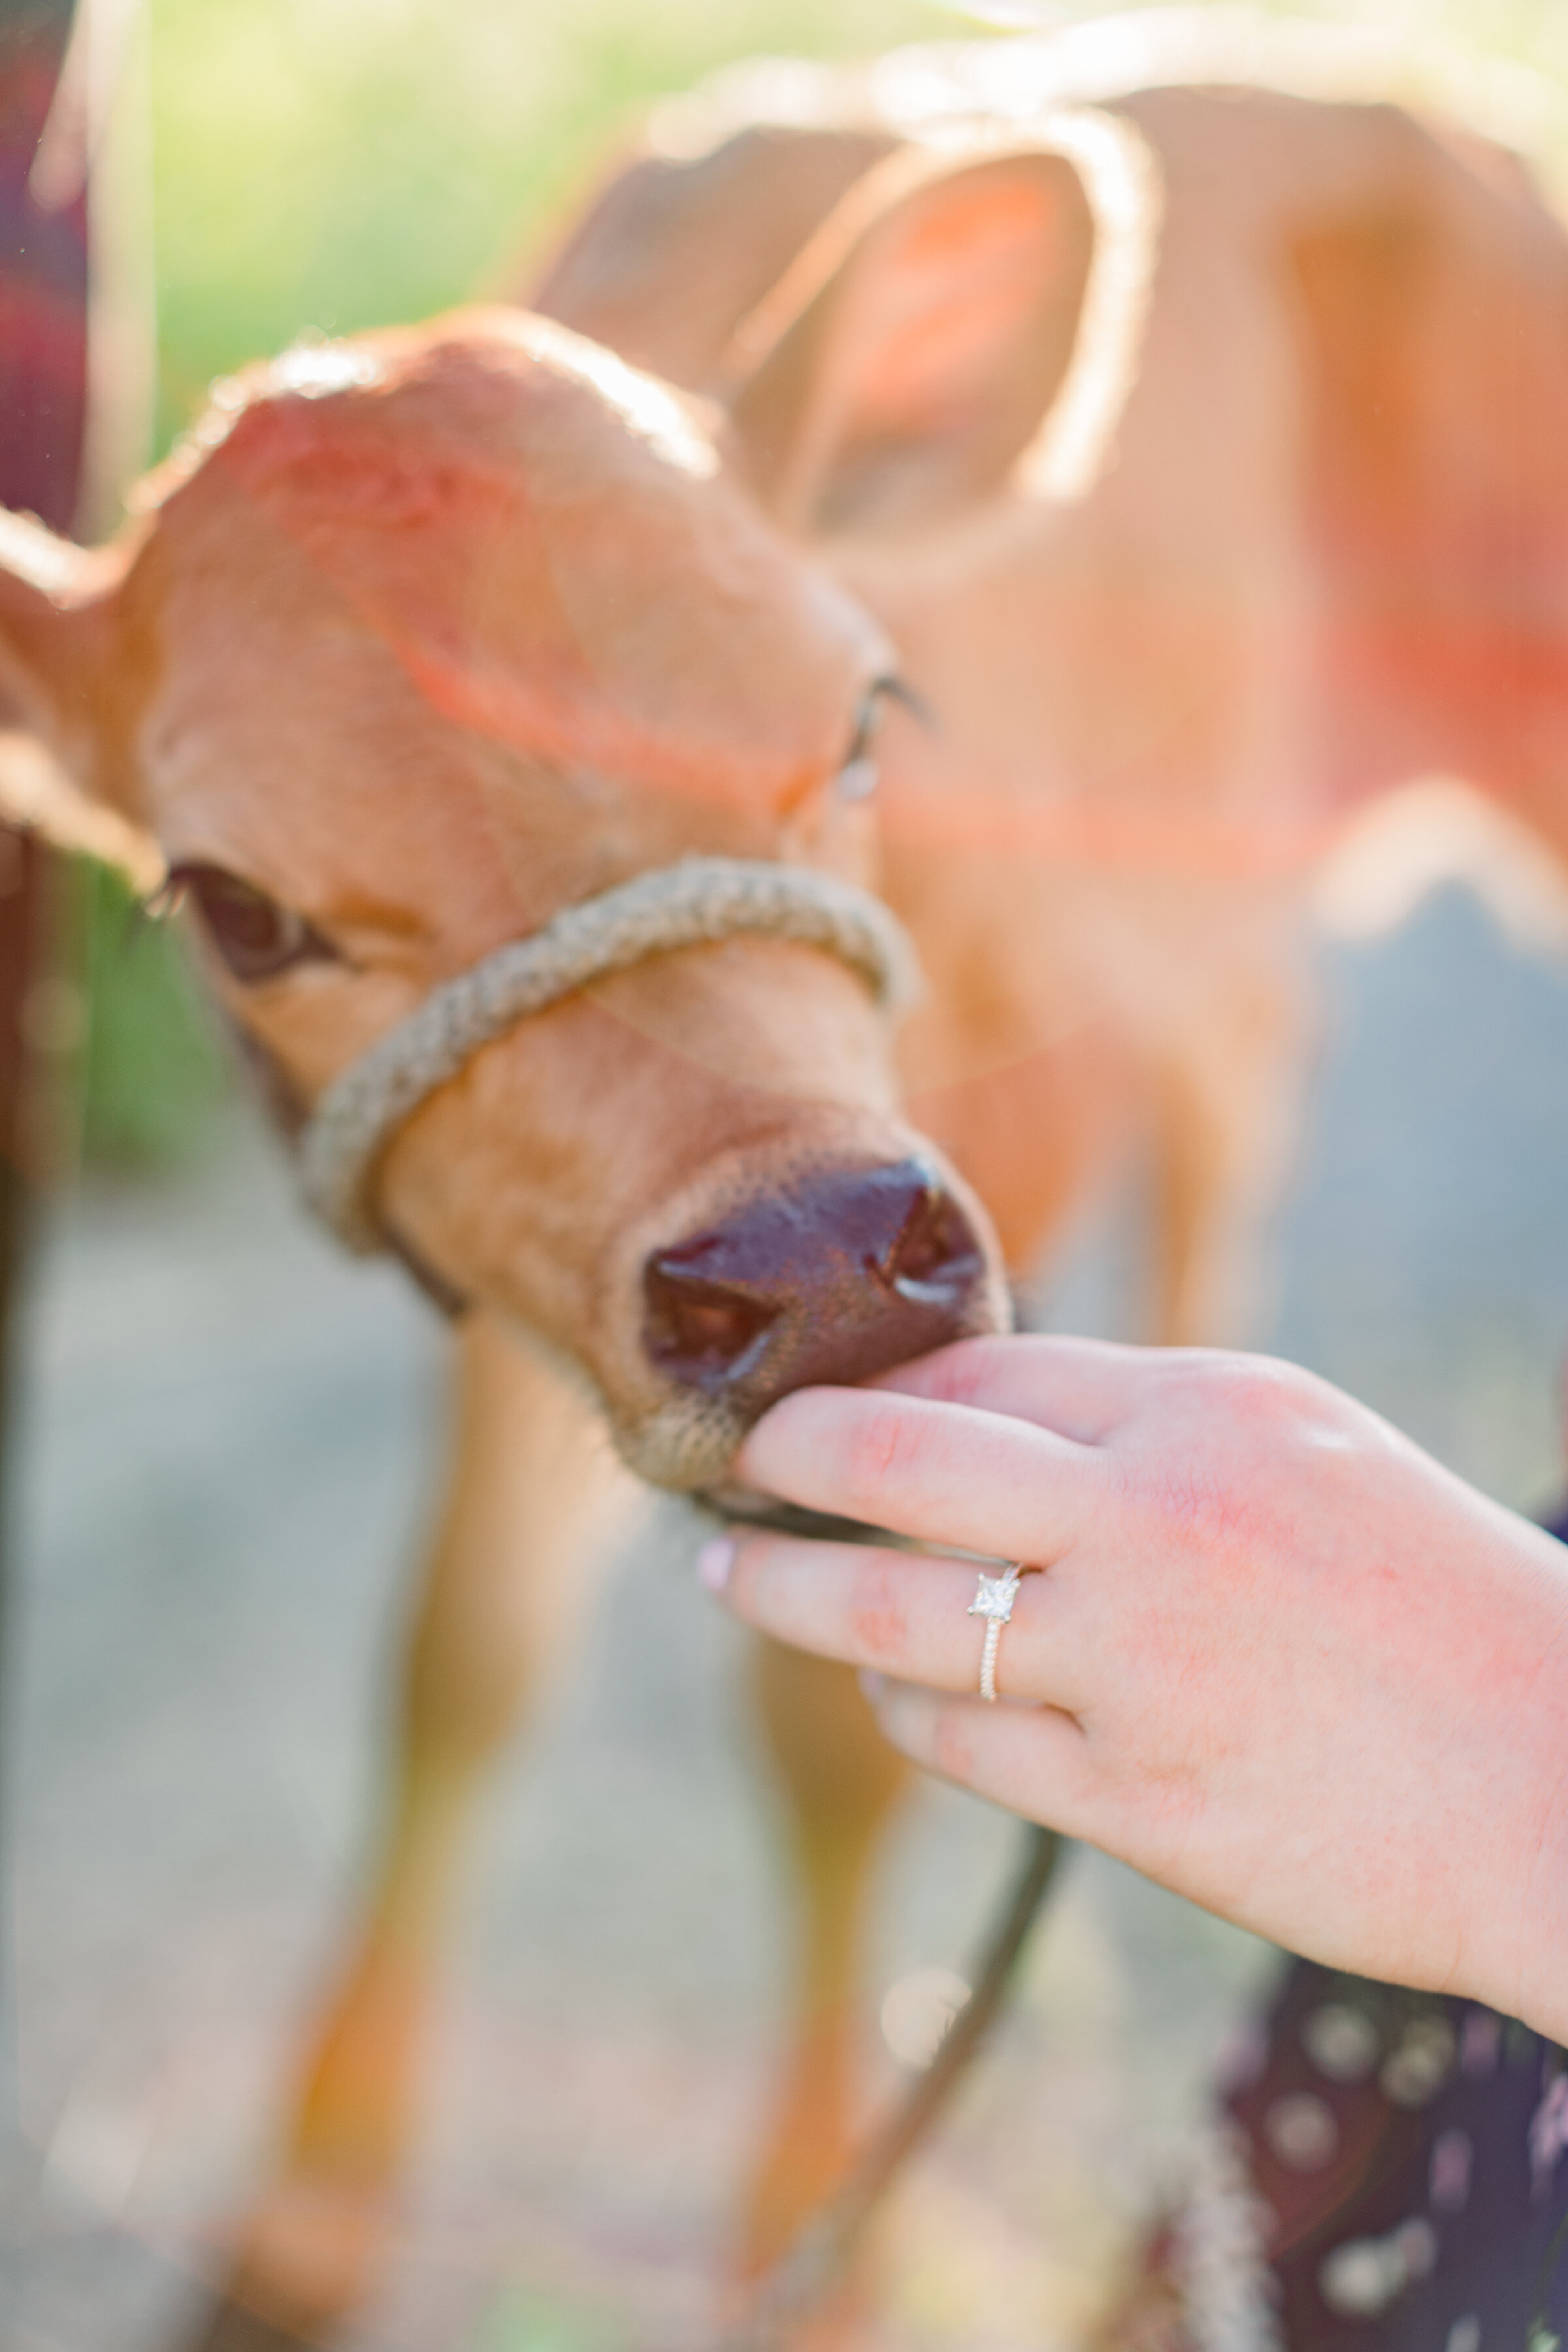  A bride shows off her engagement ring while petting a calf in a beautiful warm engagement session by Chelsea Mason Photography. Spring engagement session inspiration engagement session with cows farm animals professional photographer unique engageme